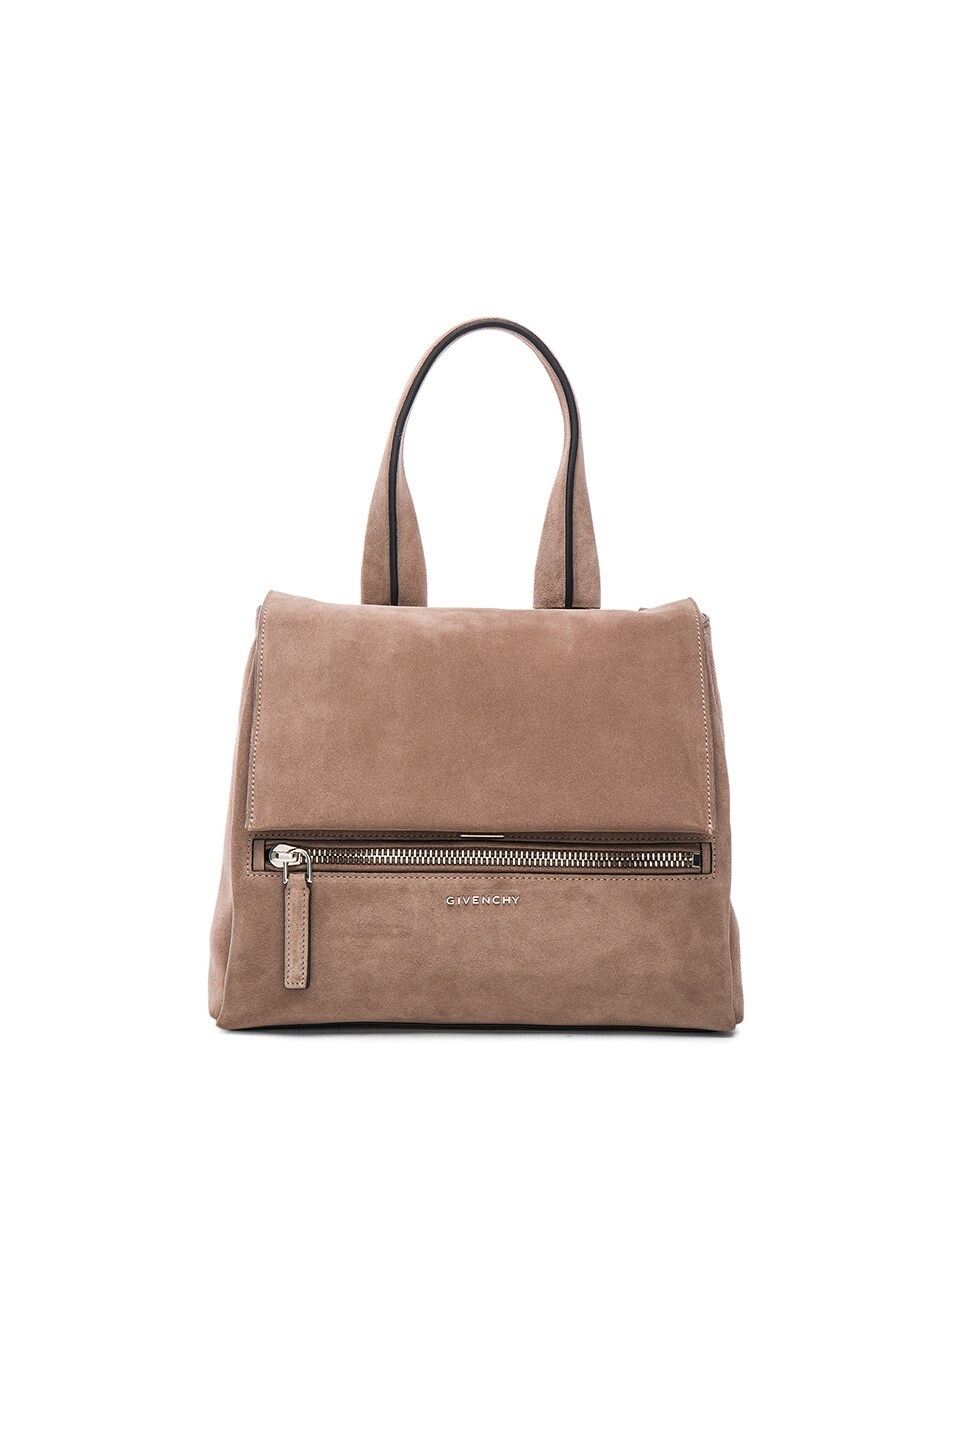 Image 1 of Givenchy Small Suede Pandora Pure Flap Bag in Sand